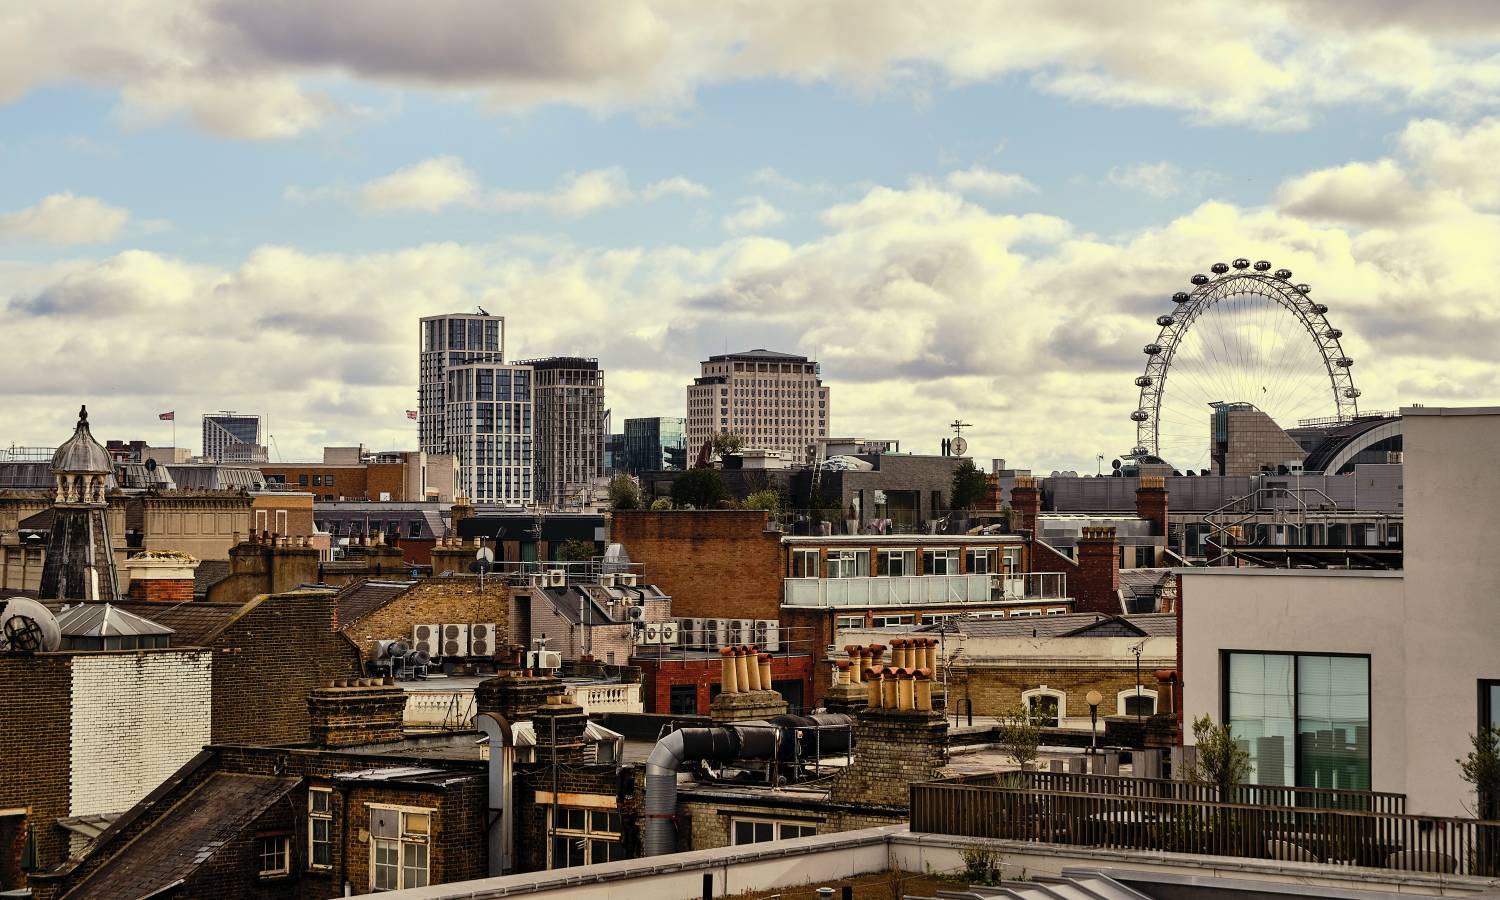 A 71% fall in supply of rental homes in London over 12 months